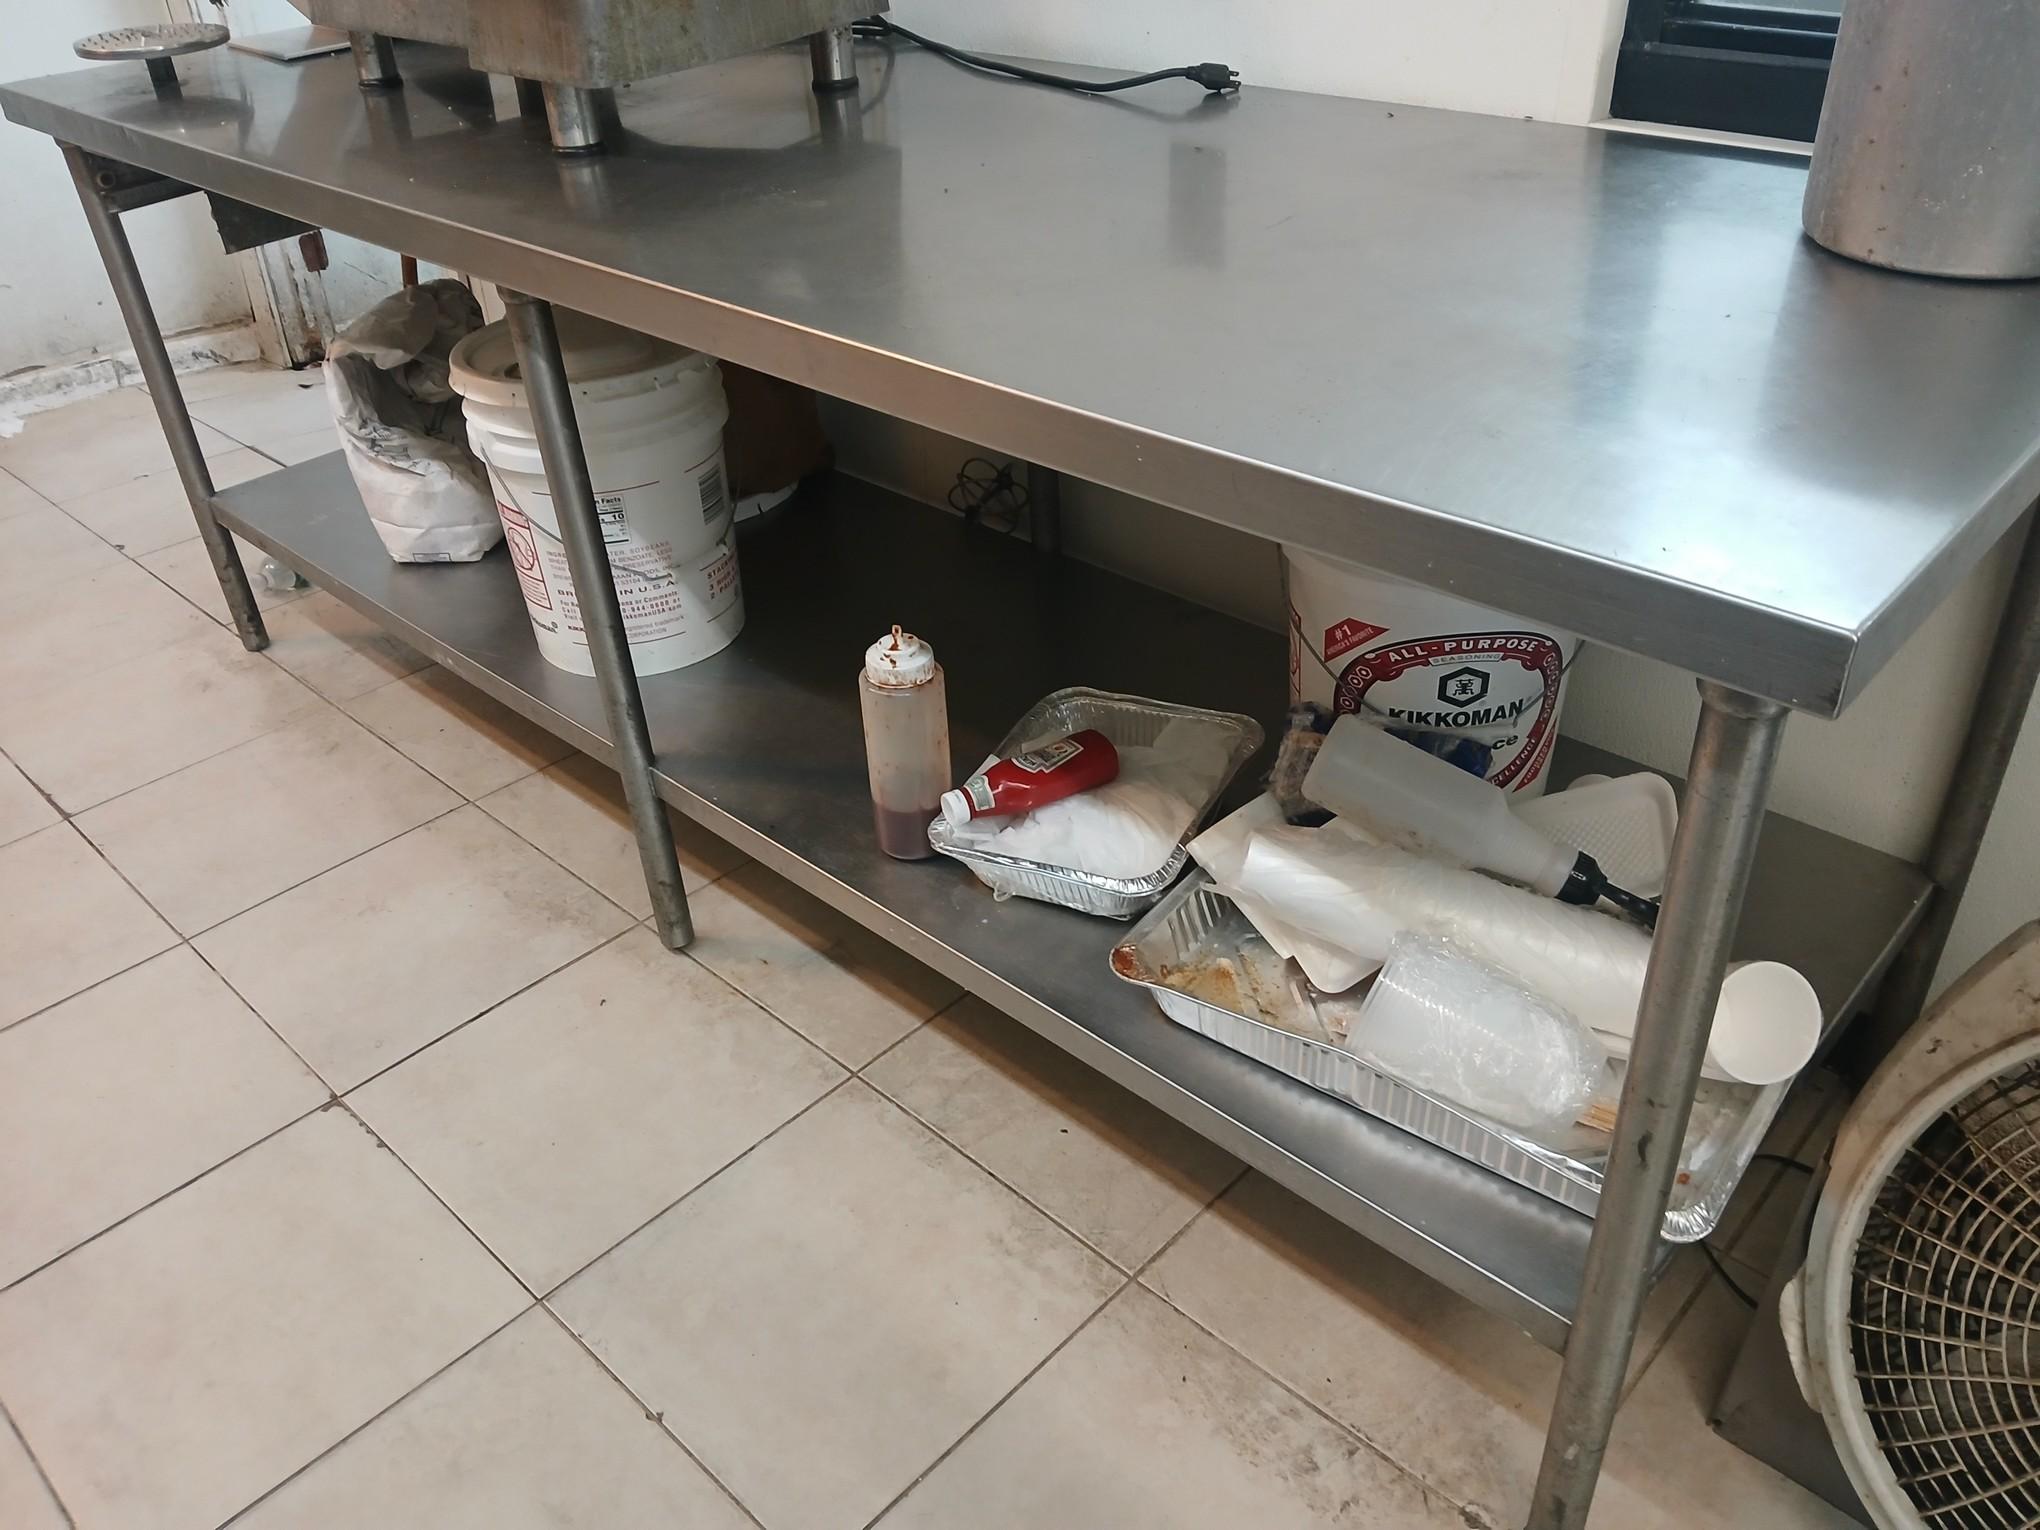 10' Stainless Steel Work Top Table W/ Under Shelf - ALL Stainless Steel table - Please see pics for